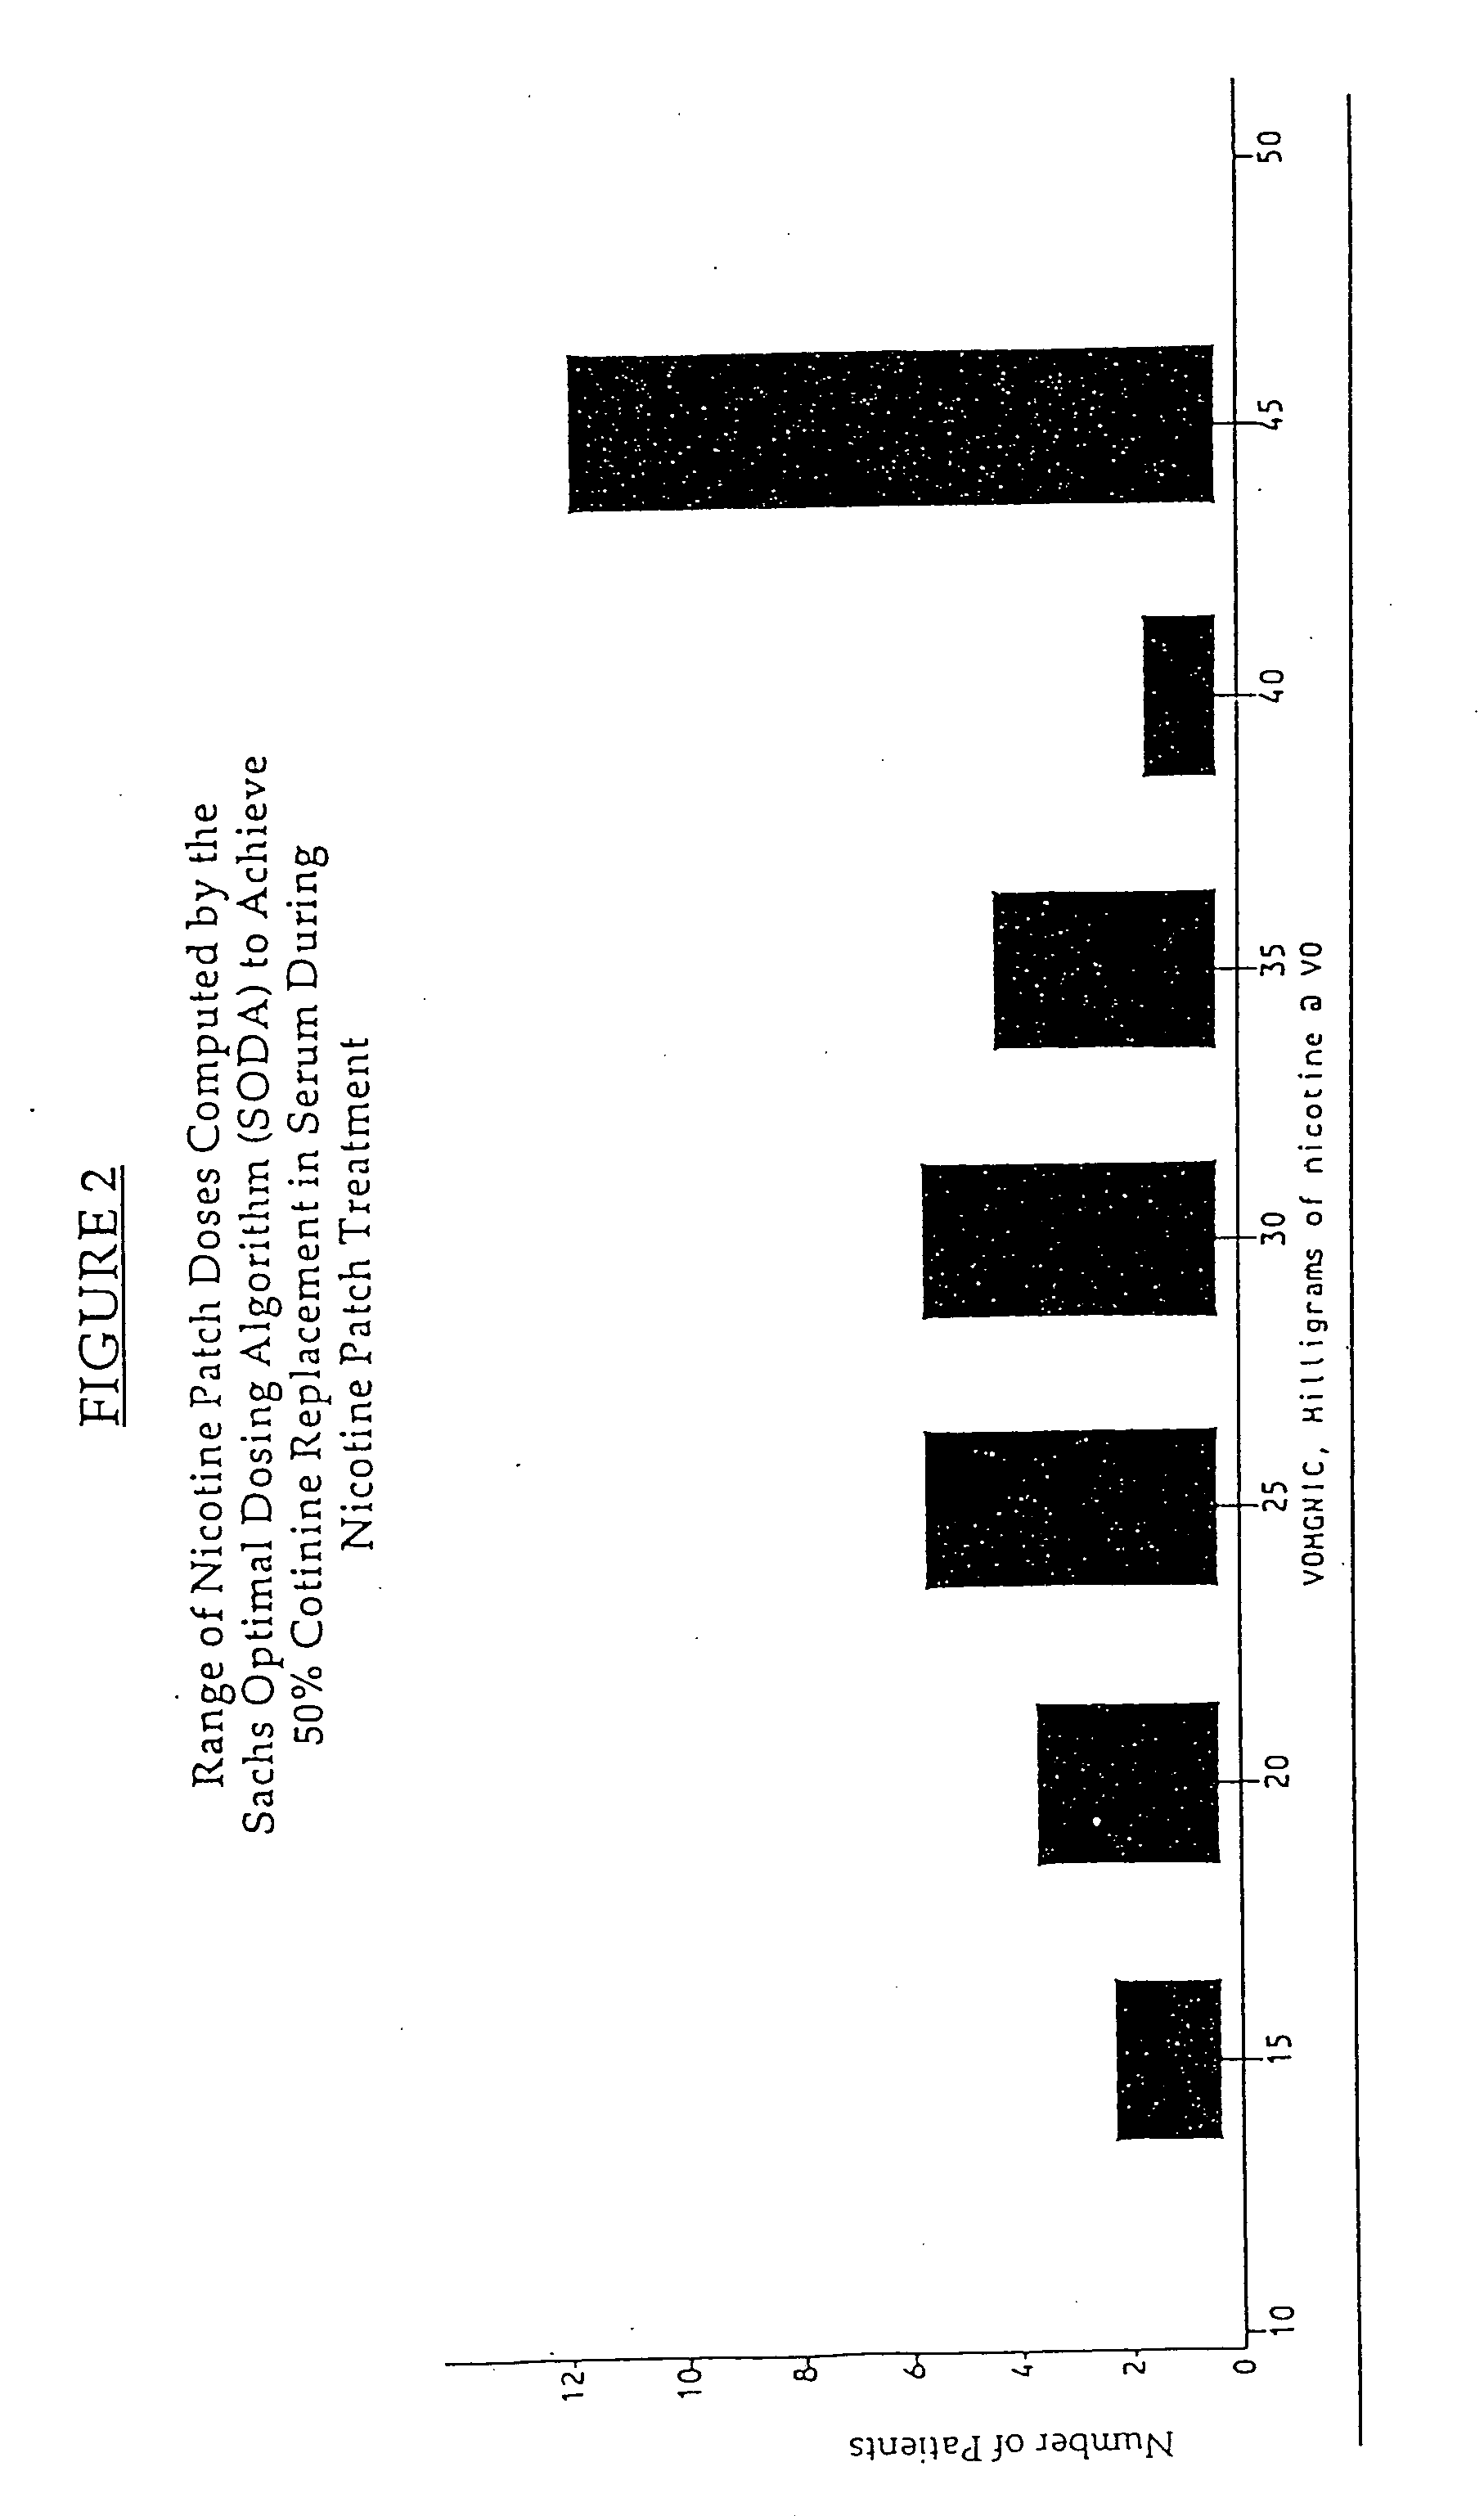 Methods for nicotine replacement dosage determination